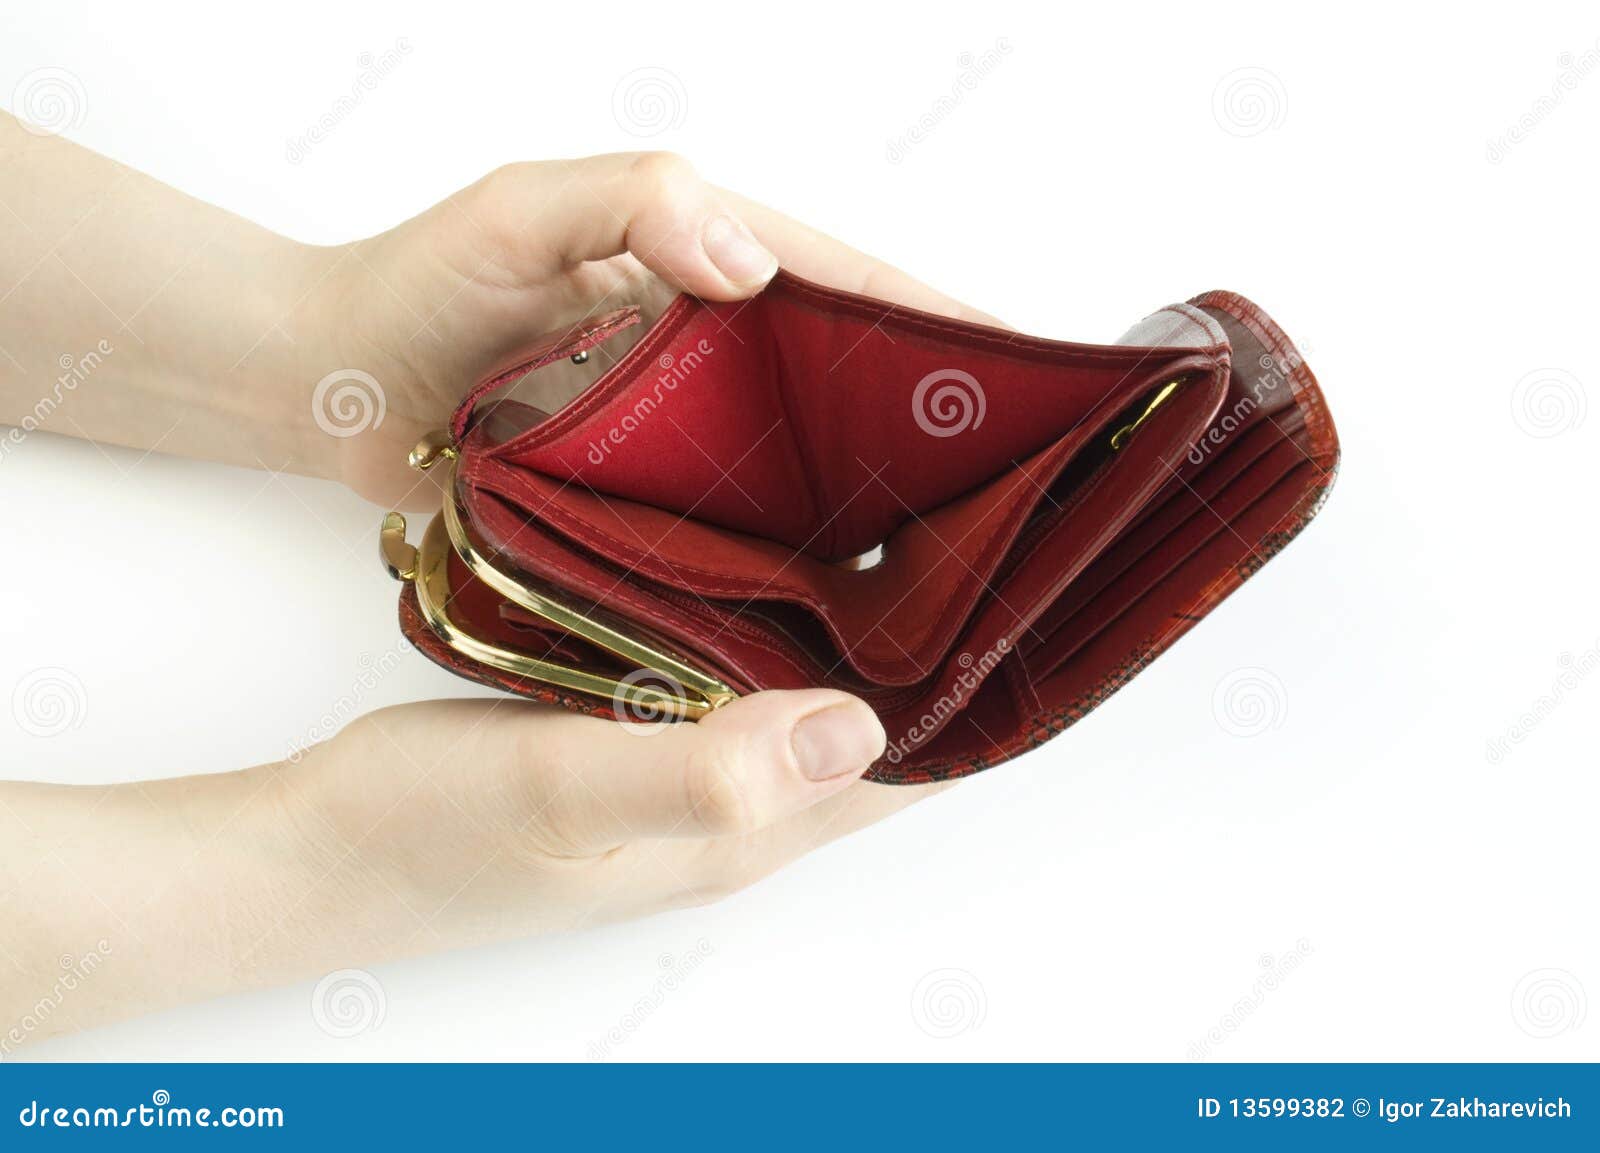 empty change purse Free Photo Download | FreeImages